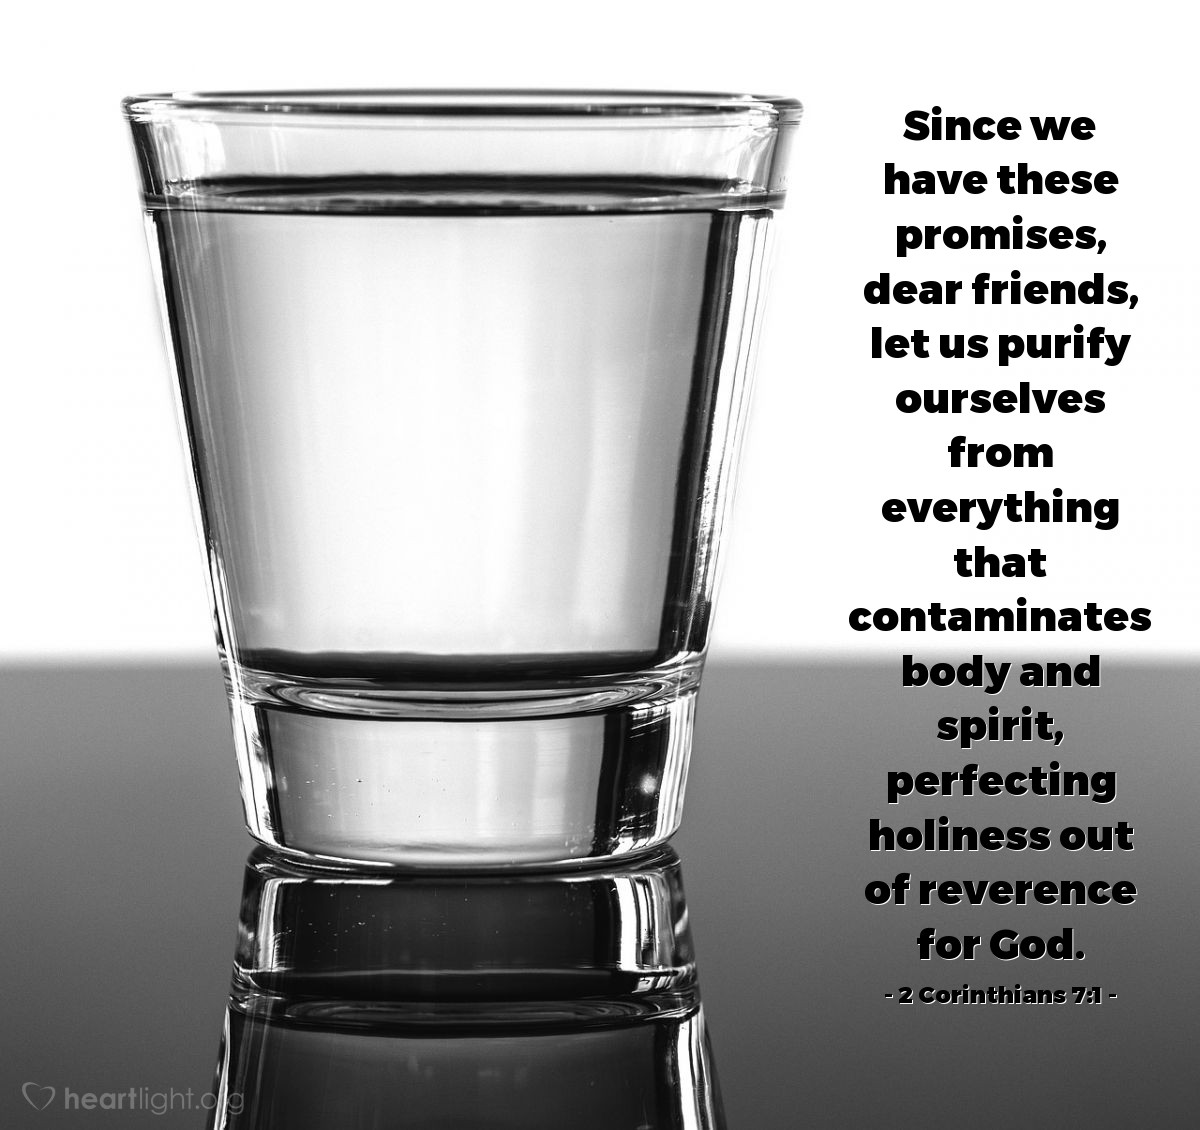 2 Corinthians 7:1 | Since we have these promises, dear friends, let us purify ourselves from everything that contaminates body and spirit, perfecting holiness out of reverence for God.